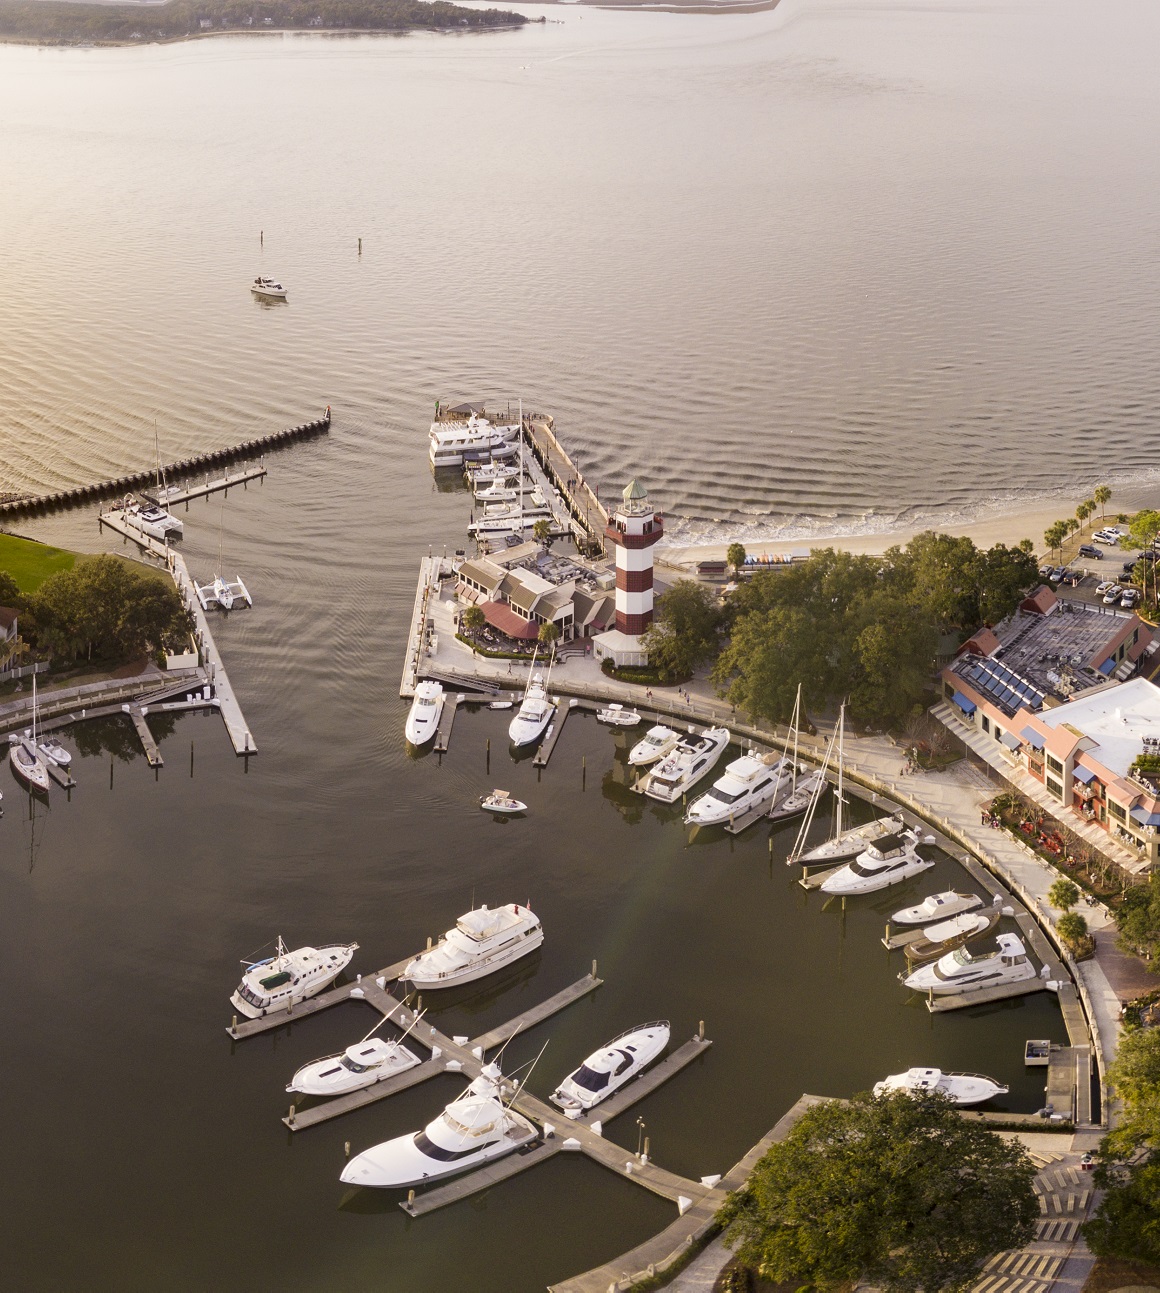 The Club Group, Hilton Head Island's top property management company, manages the Harbour Town Boat Slip Owners Association